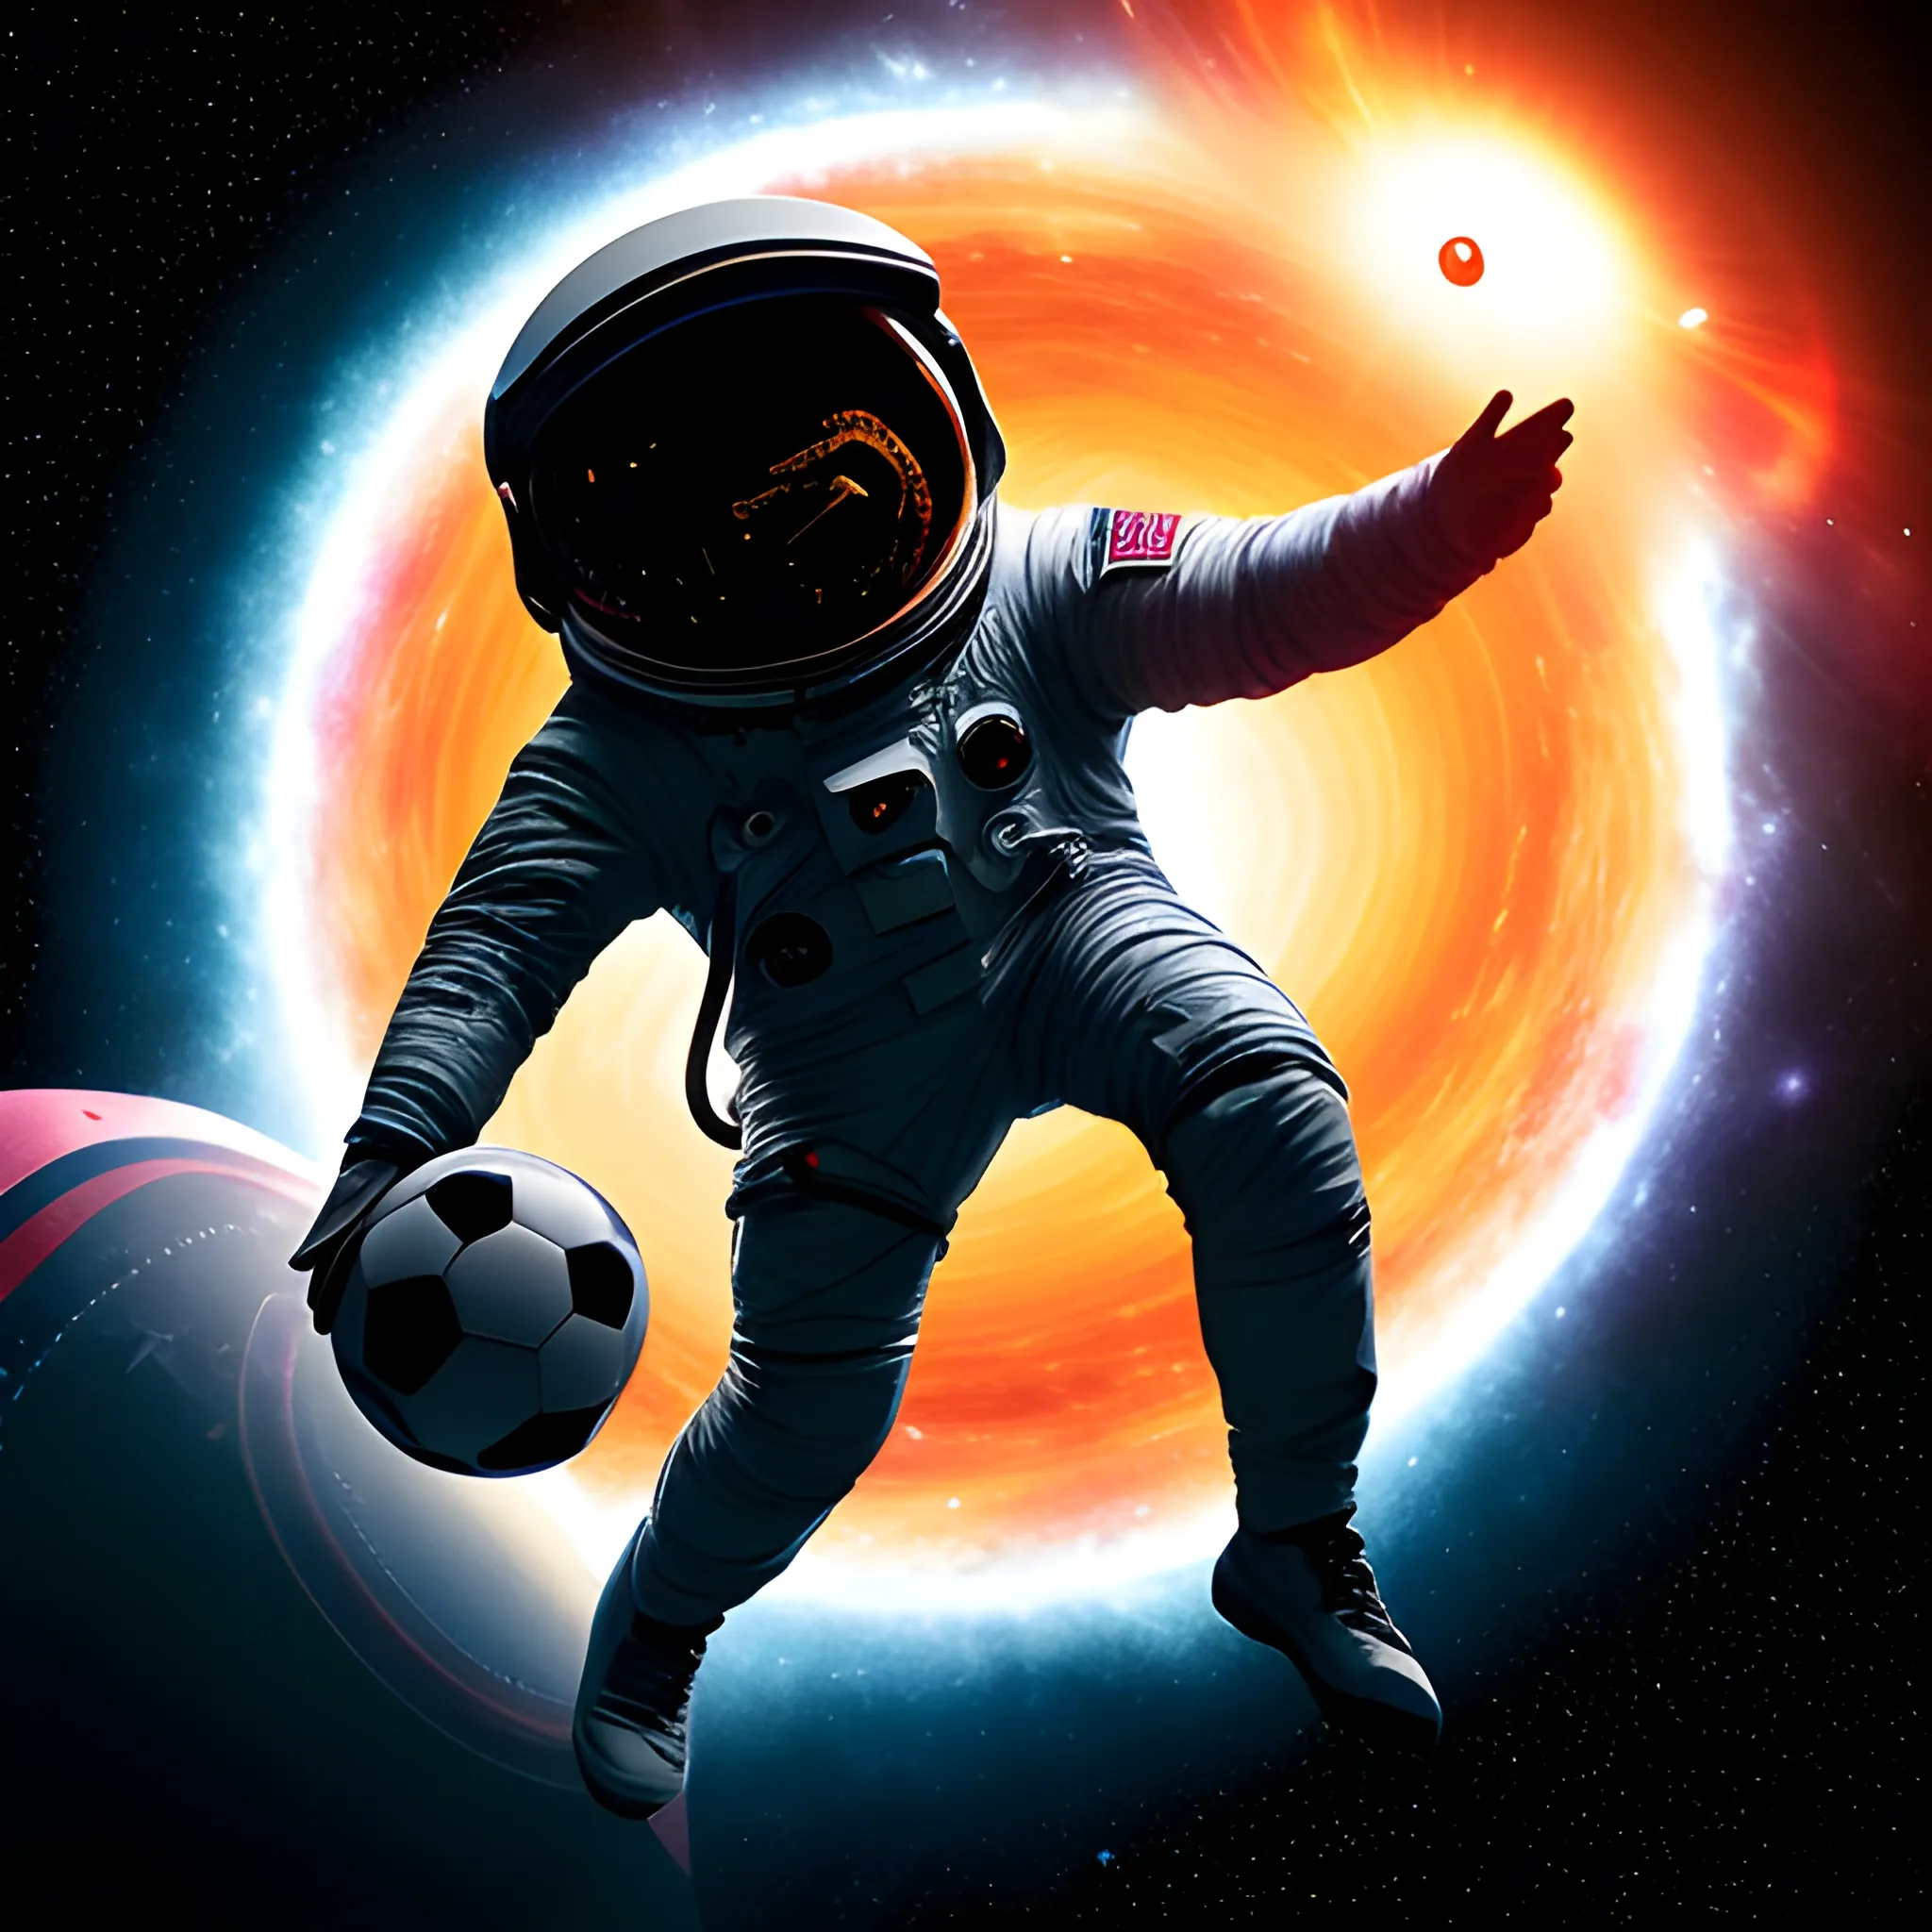 a dark clothing astronaut playing with a soccer ball in foot in a space floating, planets, and beautiful galaxy view, tripping, near a black hole, no flags



